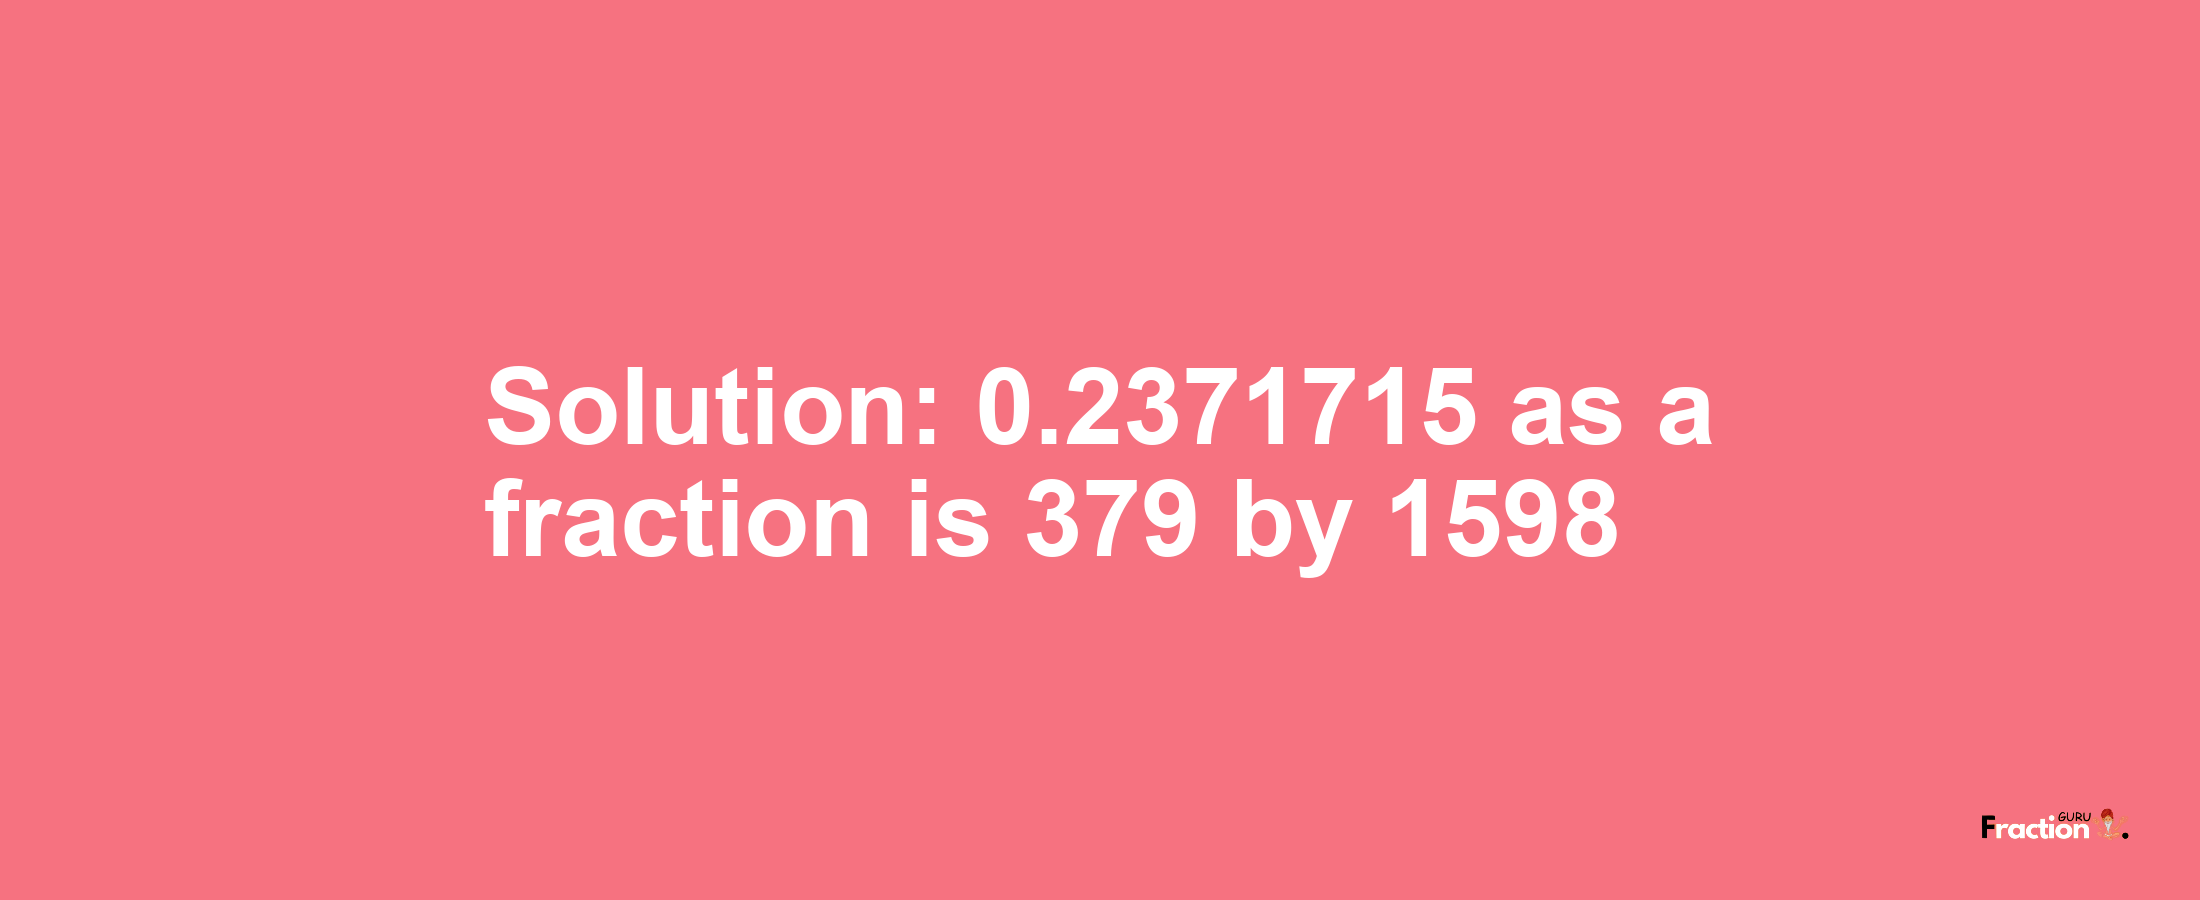 Solution:0.2371715 as a fraction is 379/1598